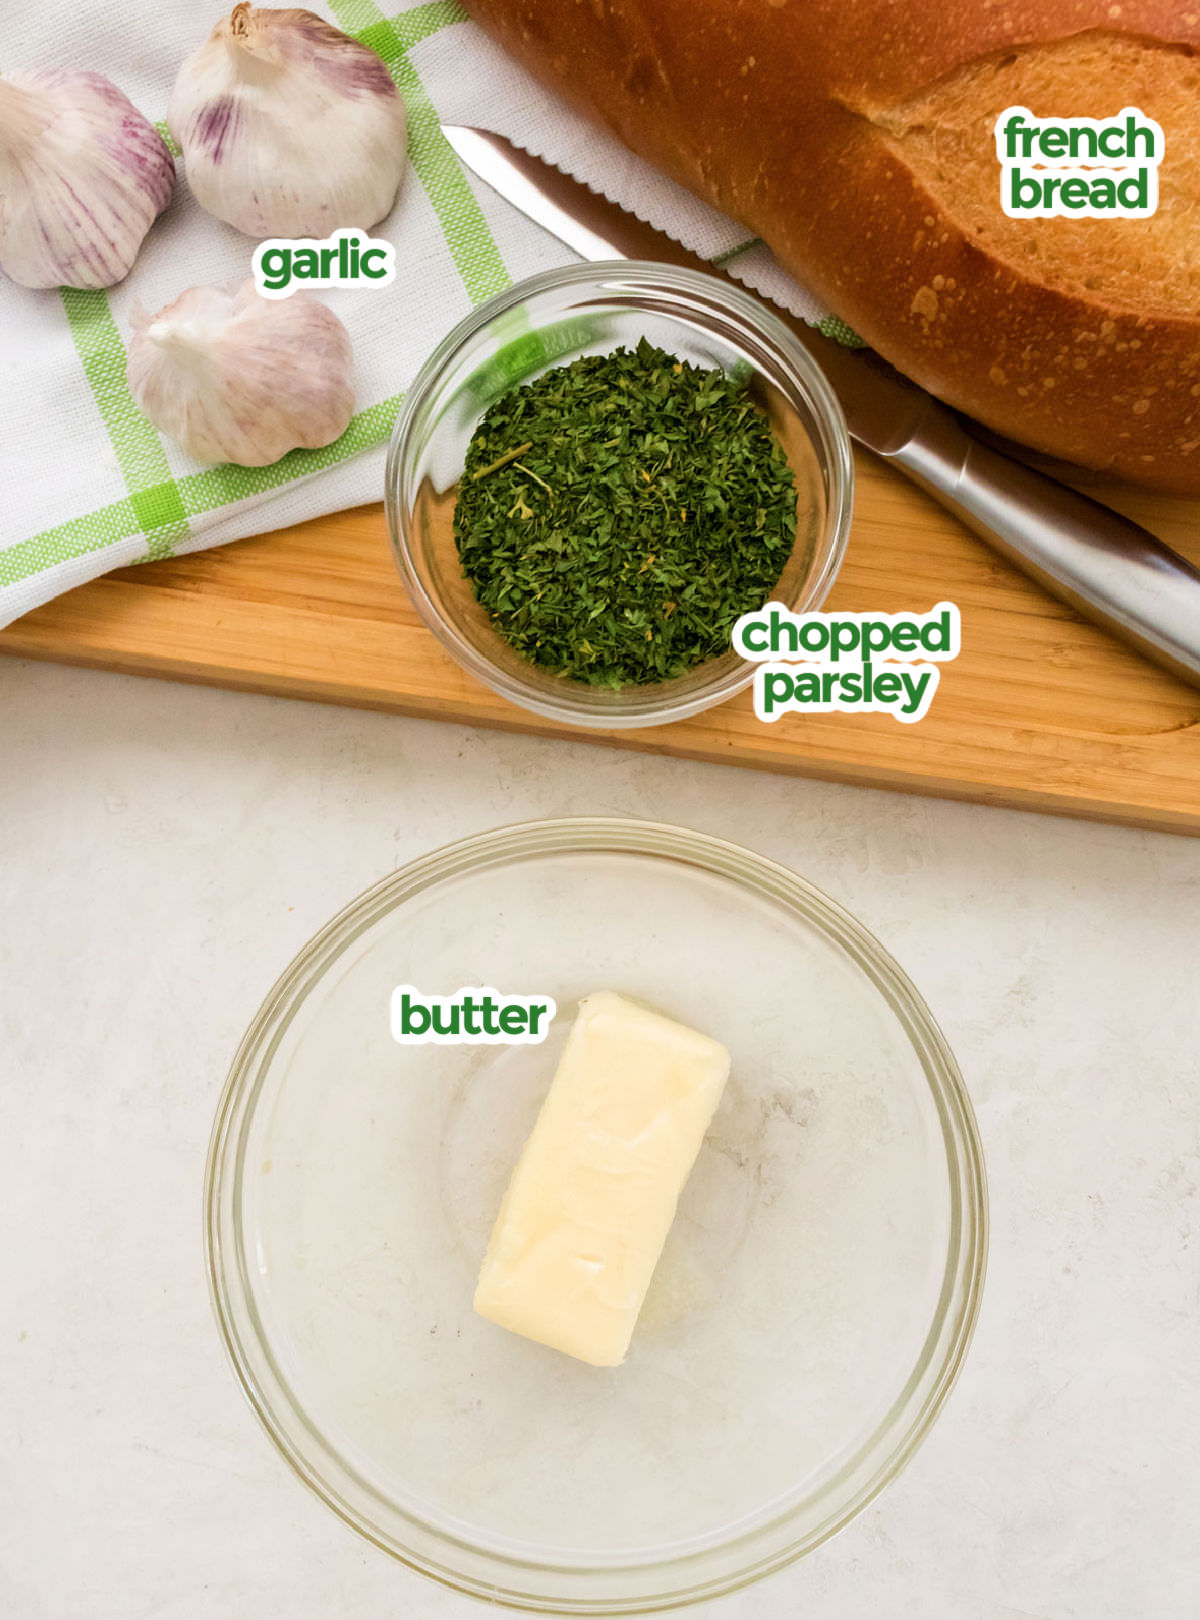 All the ingredients you will need to make Garlic Bread including French Bread, Chopped Parsley, Garlic and Butter.